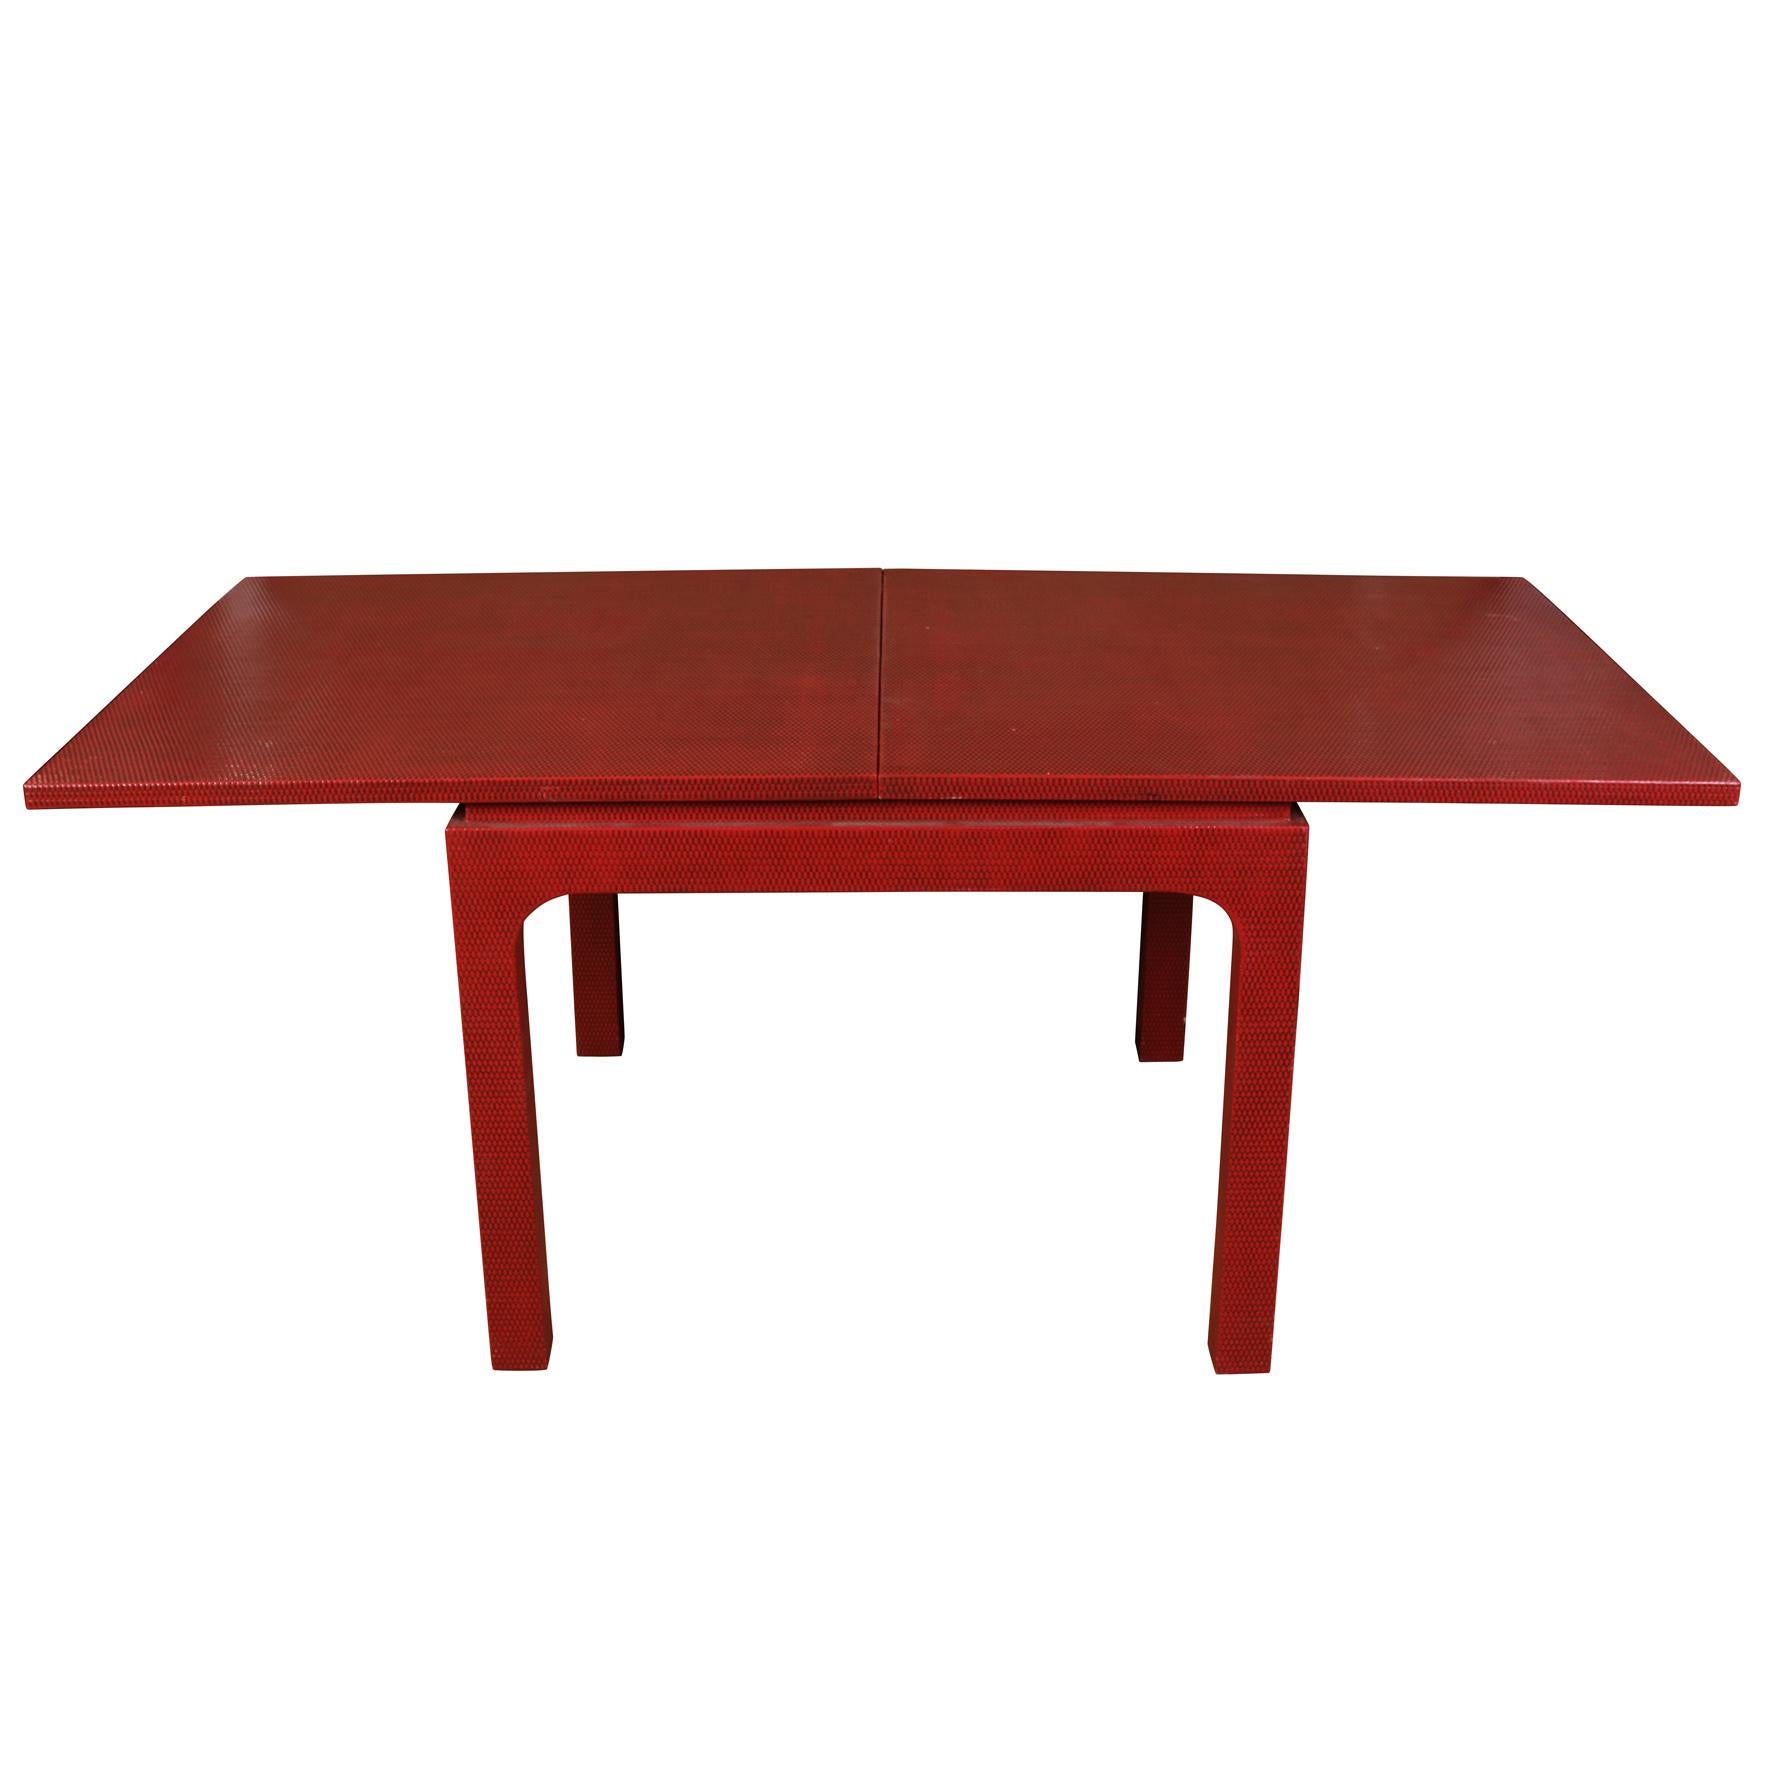 Red lacquered grasscloth games table with top that expands to a 72.25